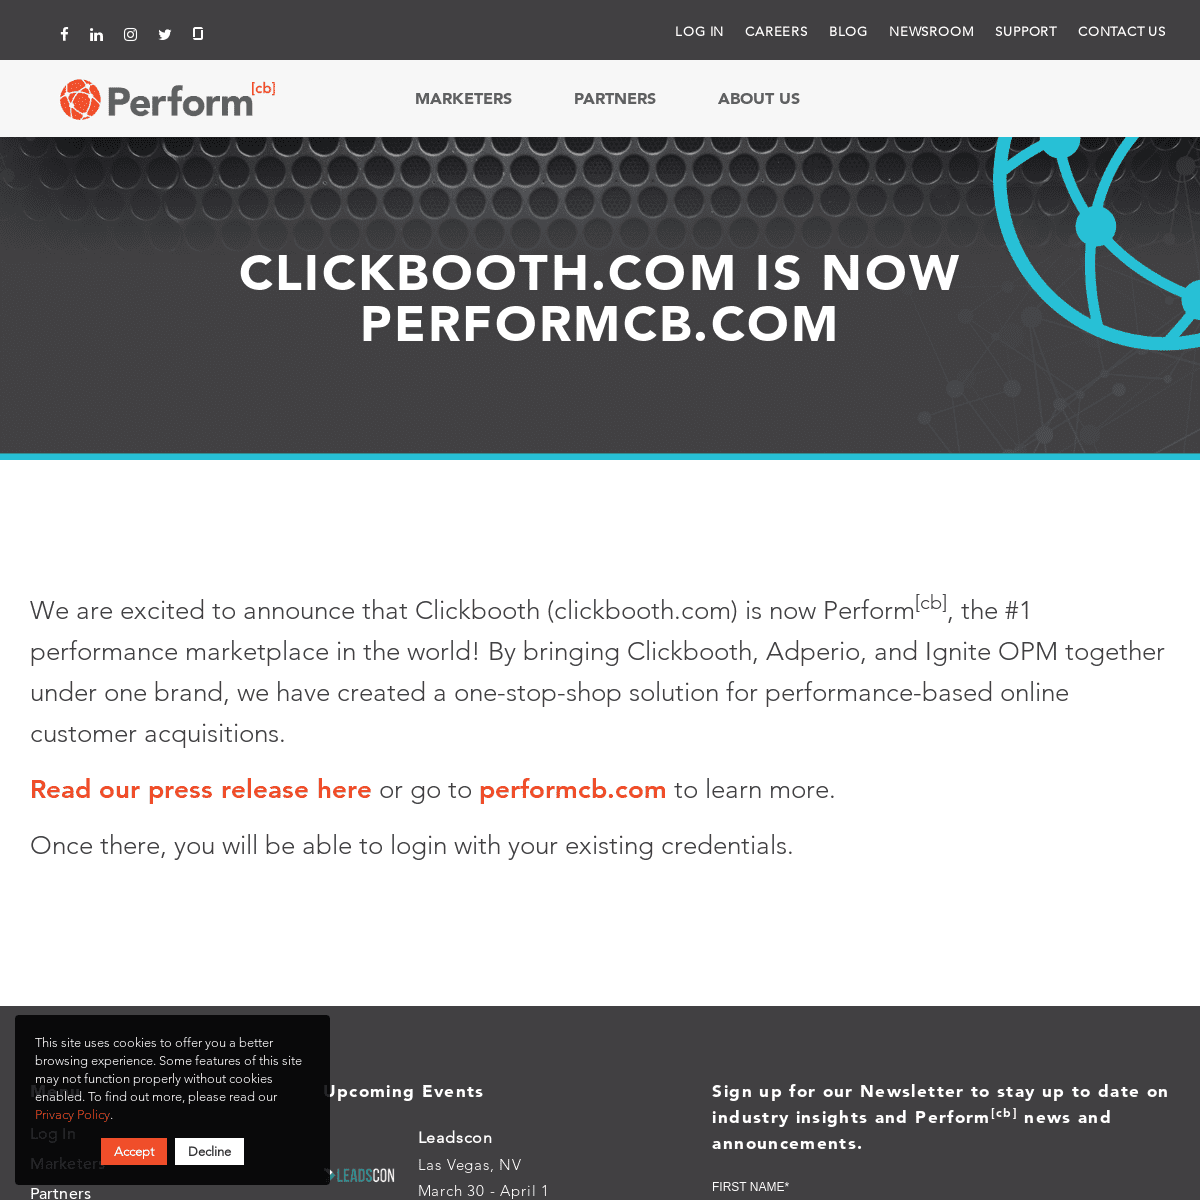 A complete backup of clickbooth.com